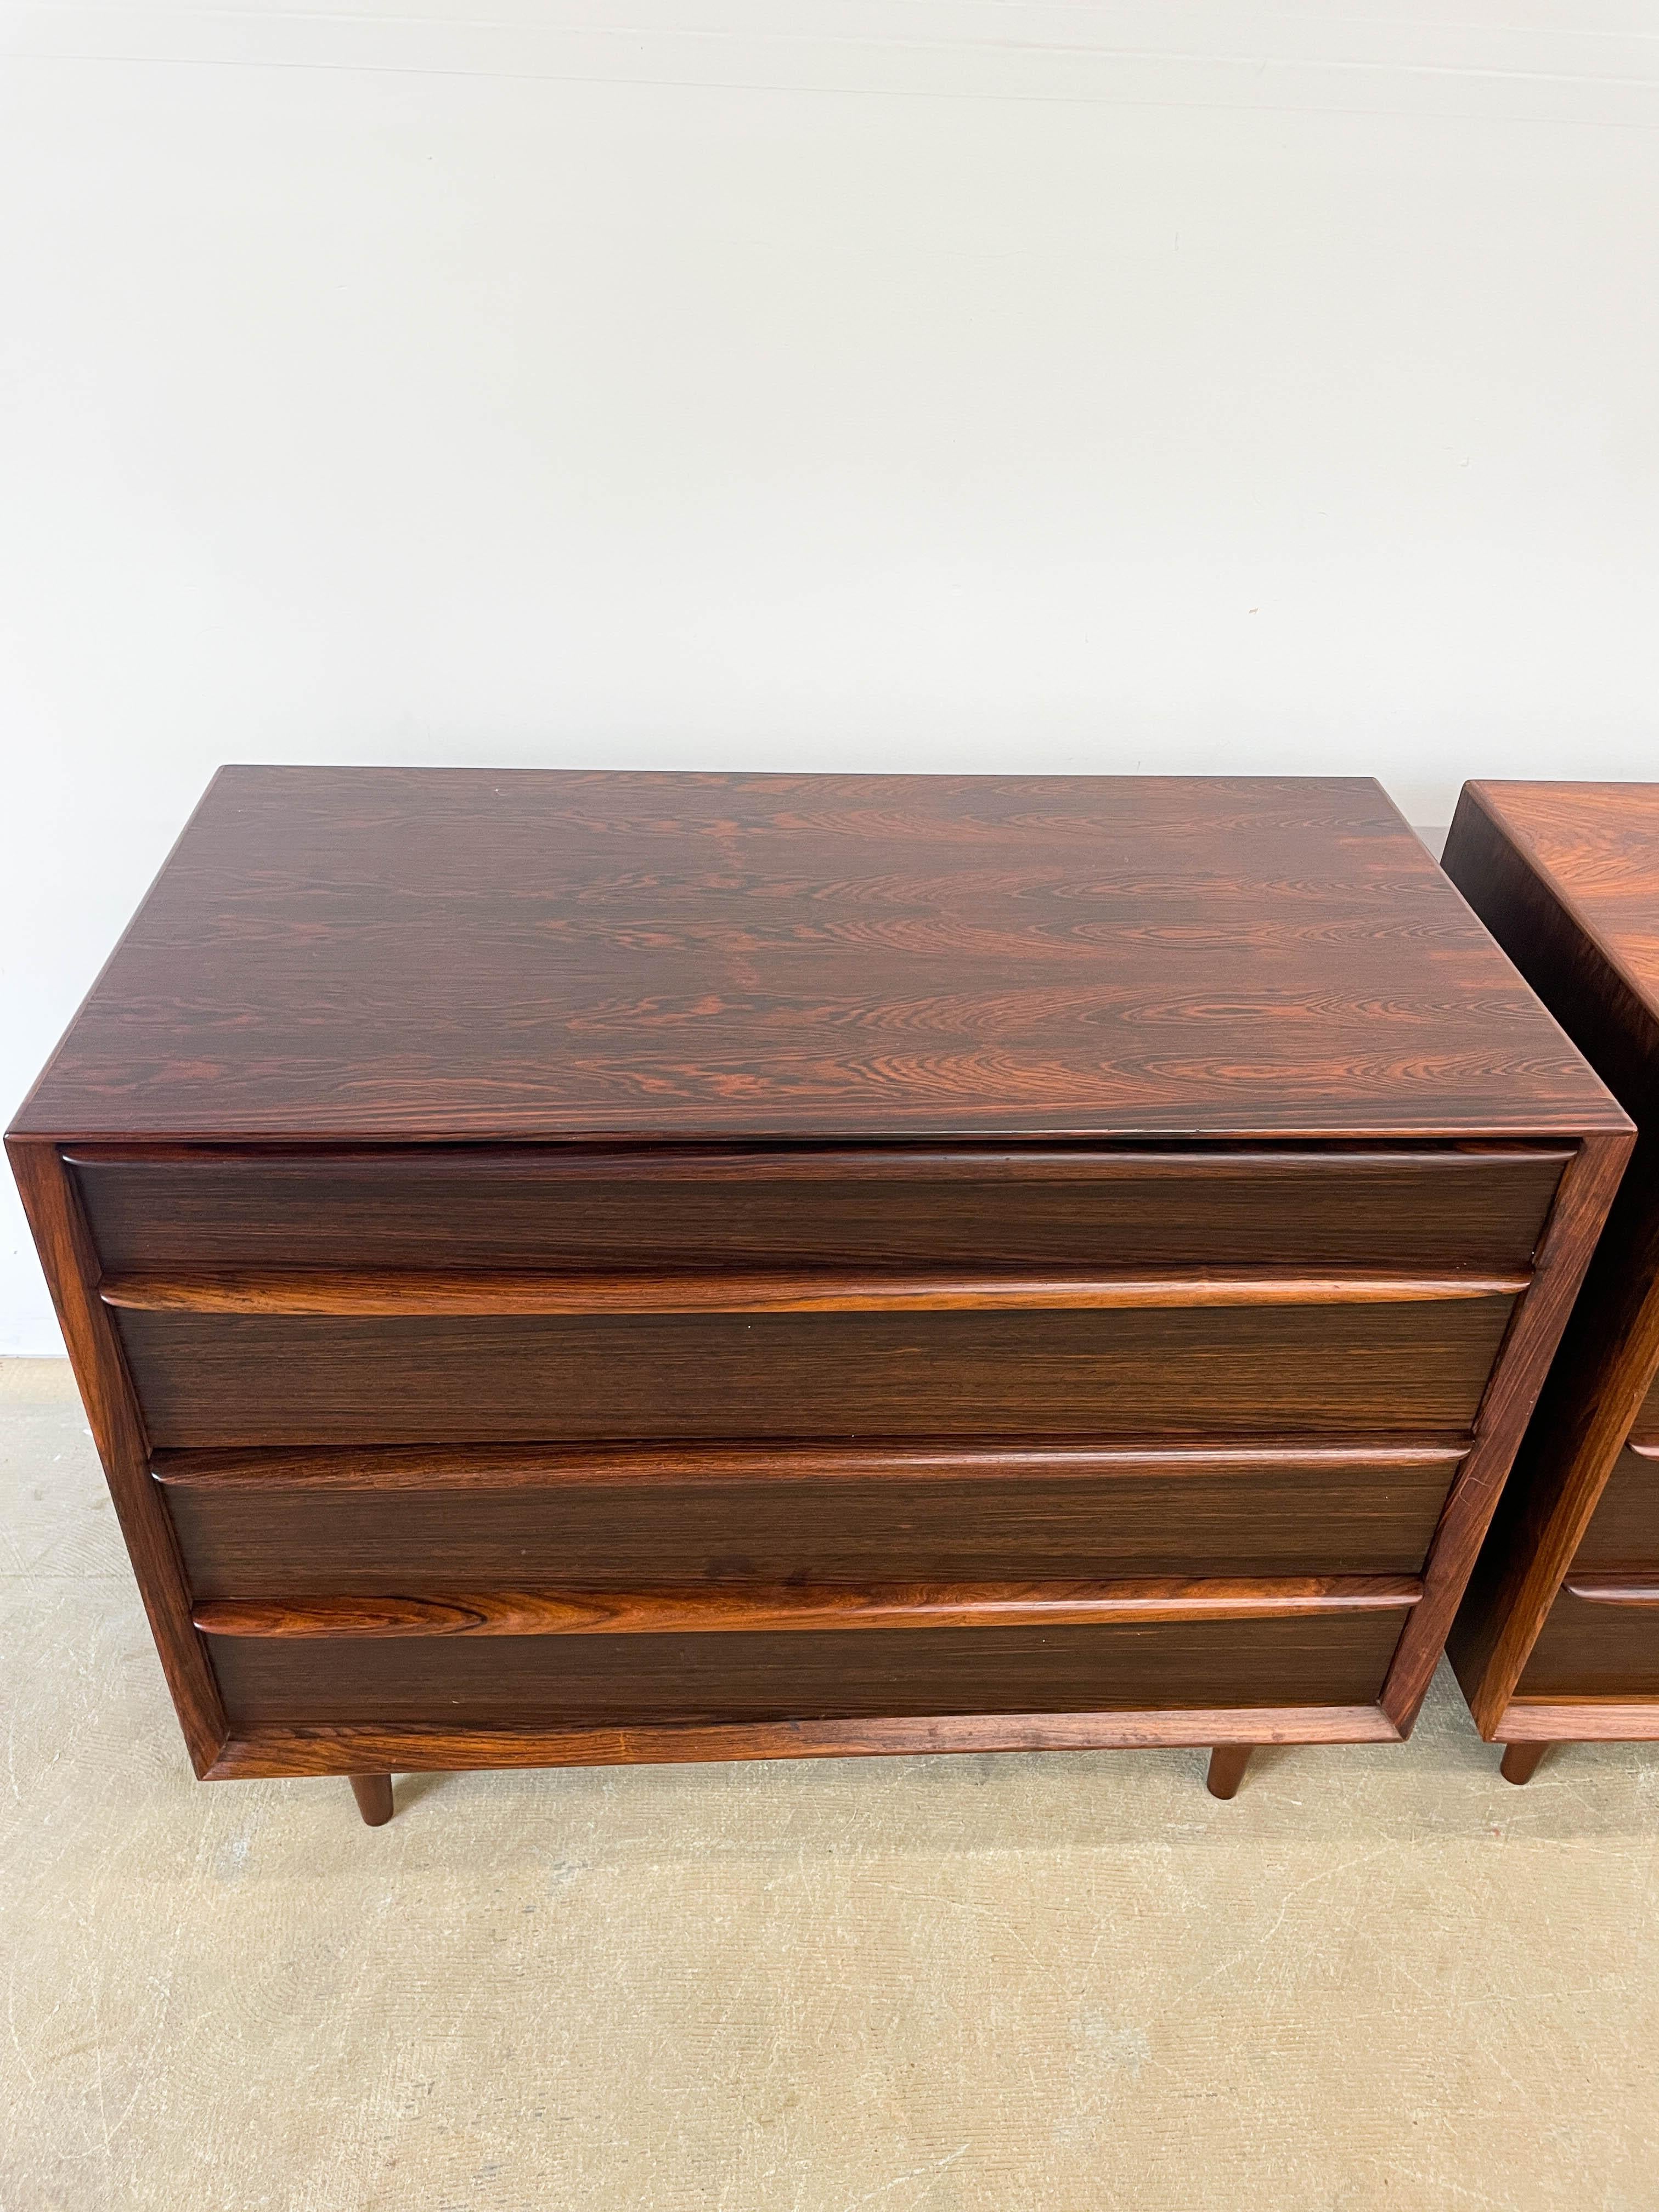 Pair of Rosewood Dressers by Falster In Good Condition For Sale In Kalamazoo, MI